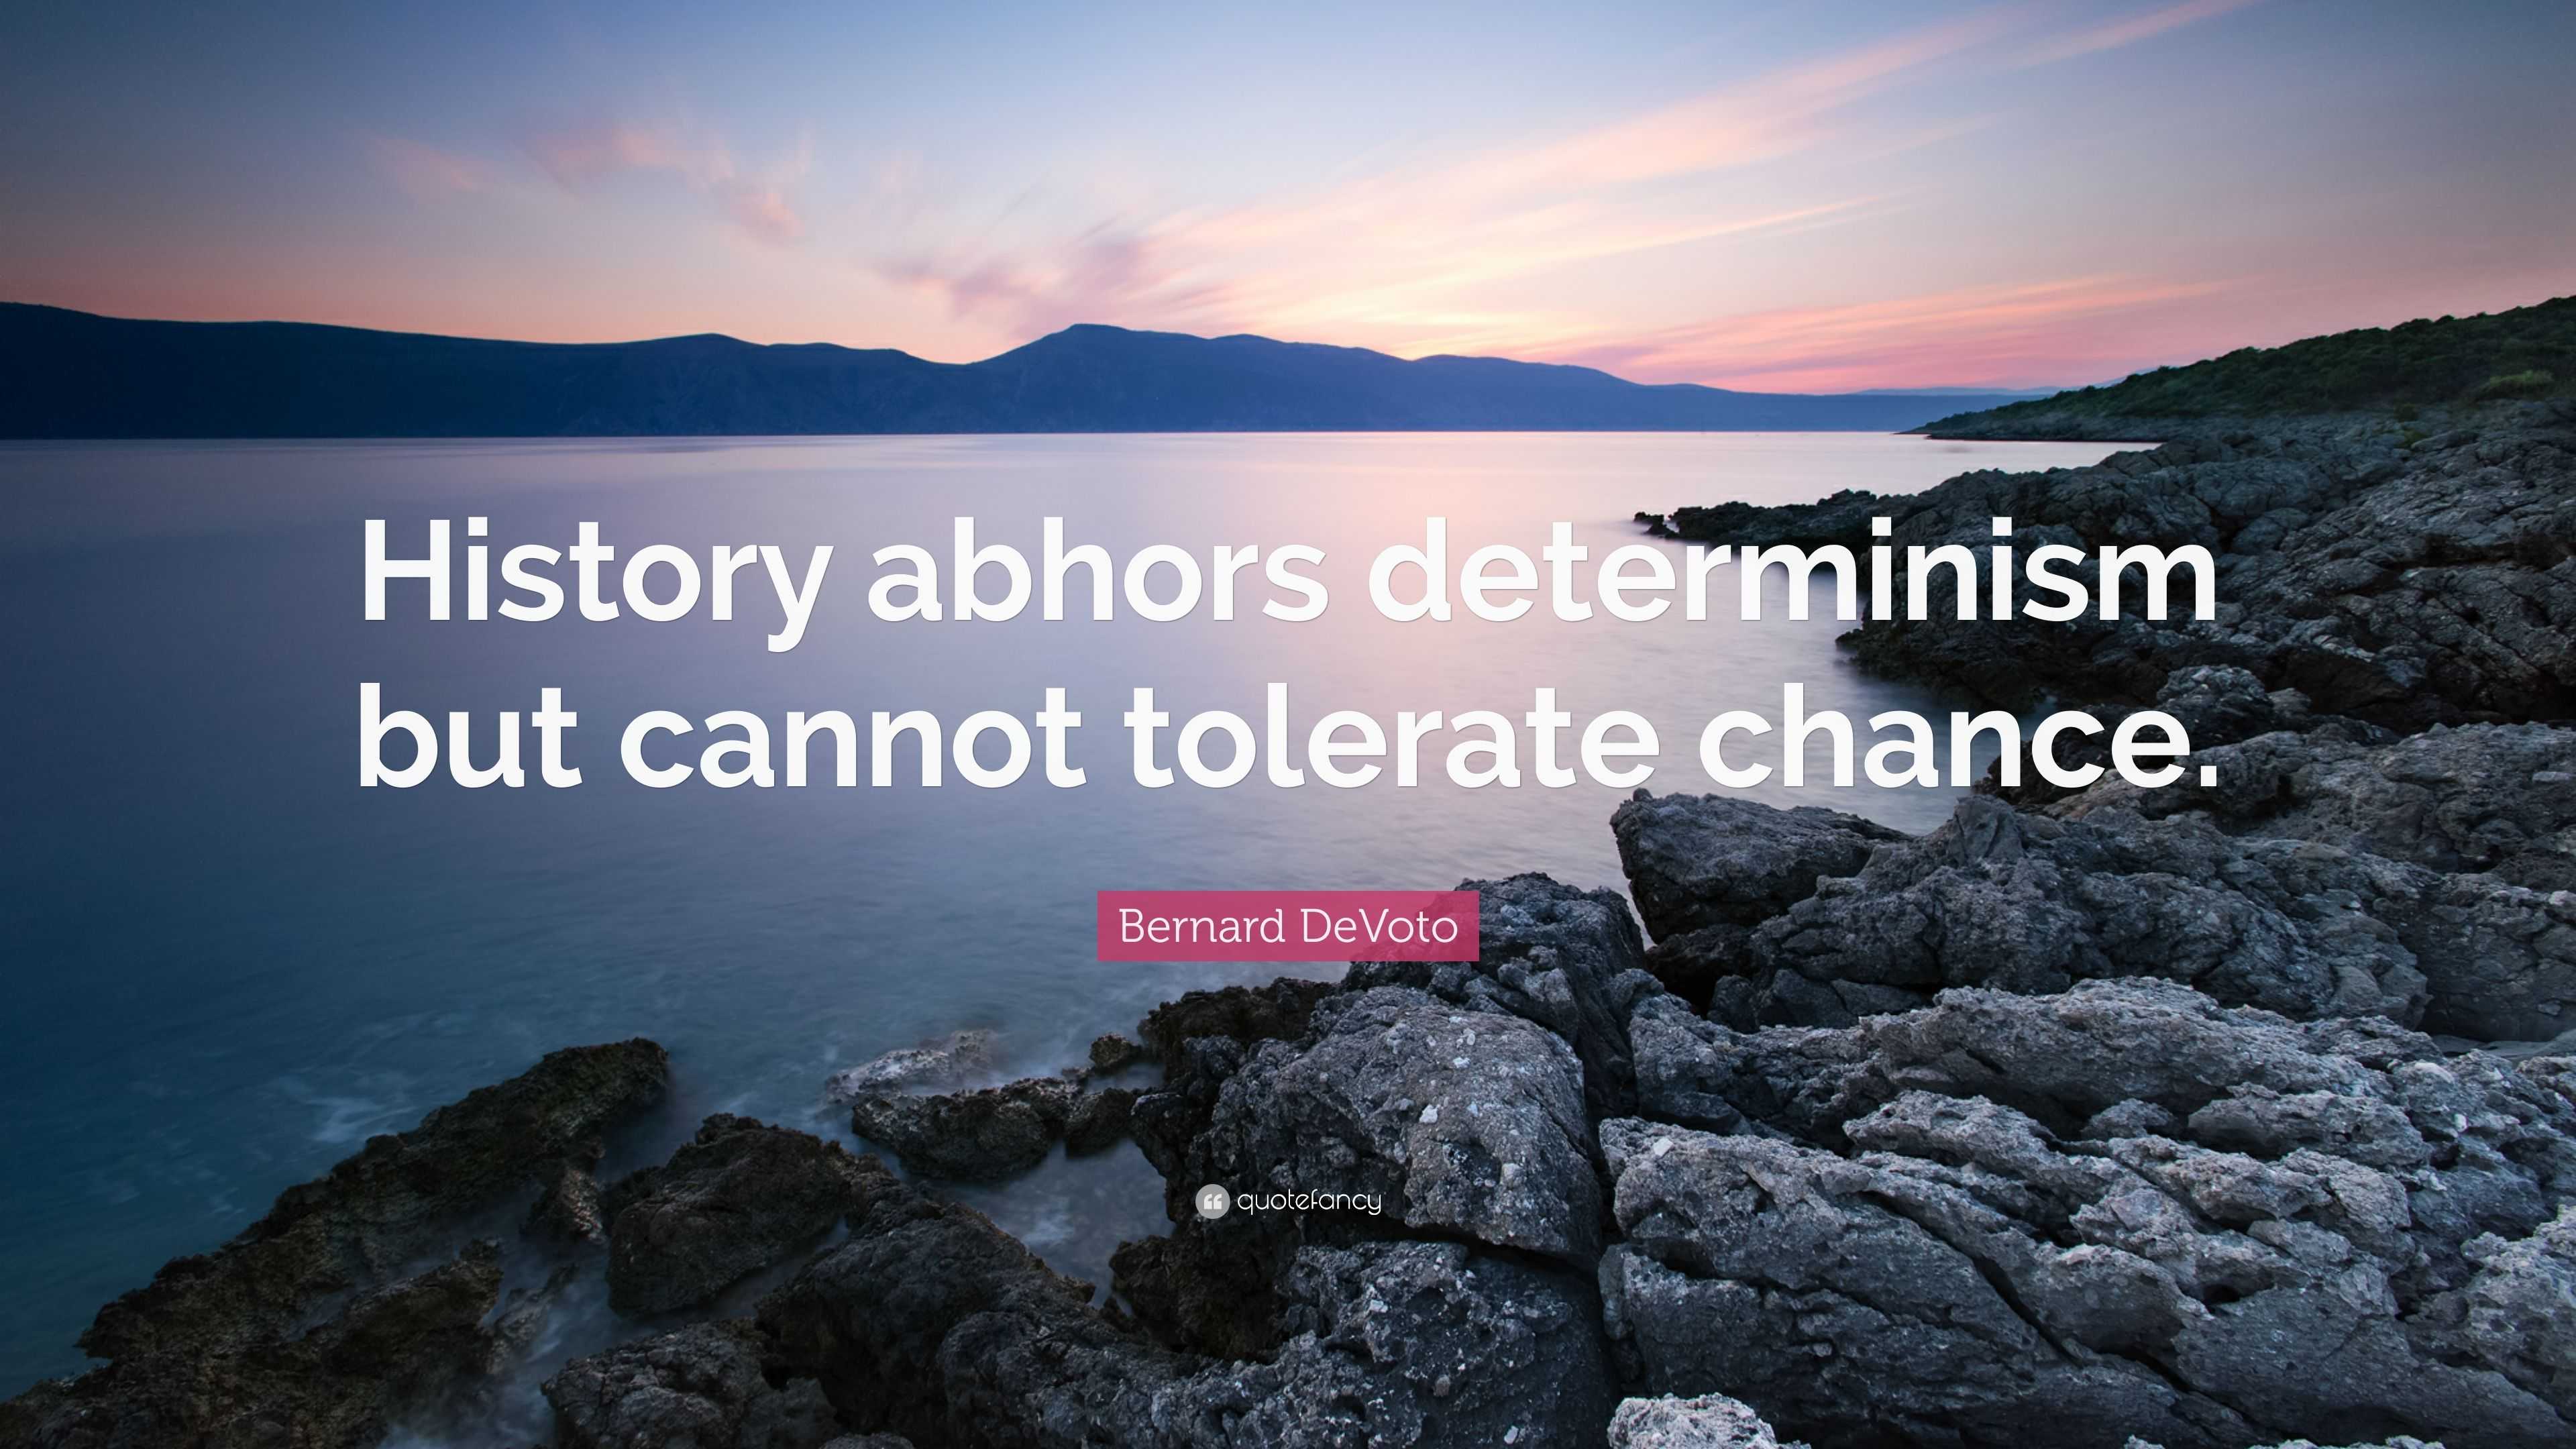 Bernard DeVoto Quote: “History abhors determinism but cannot tolerate ...